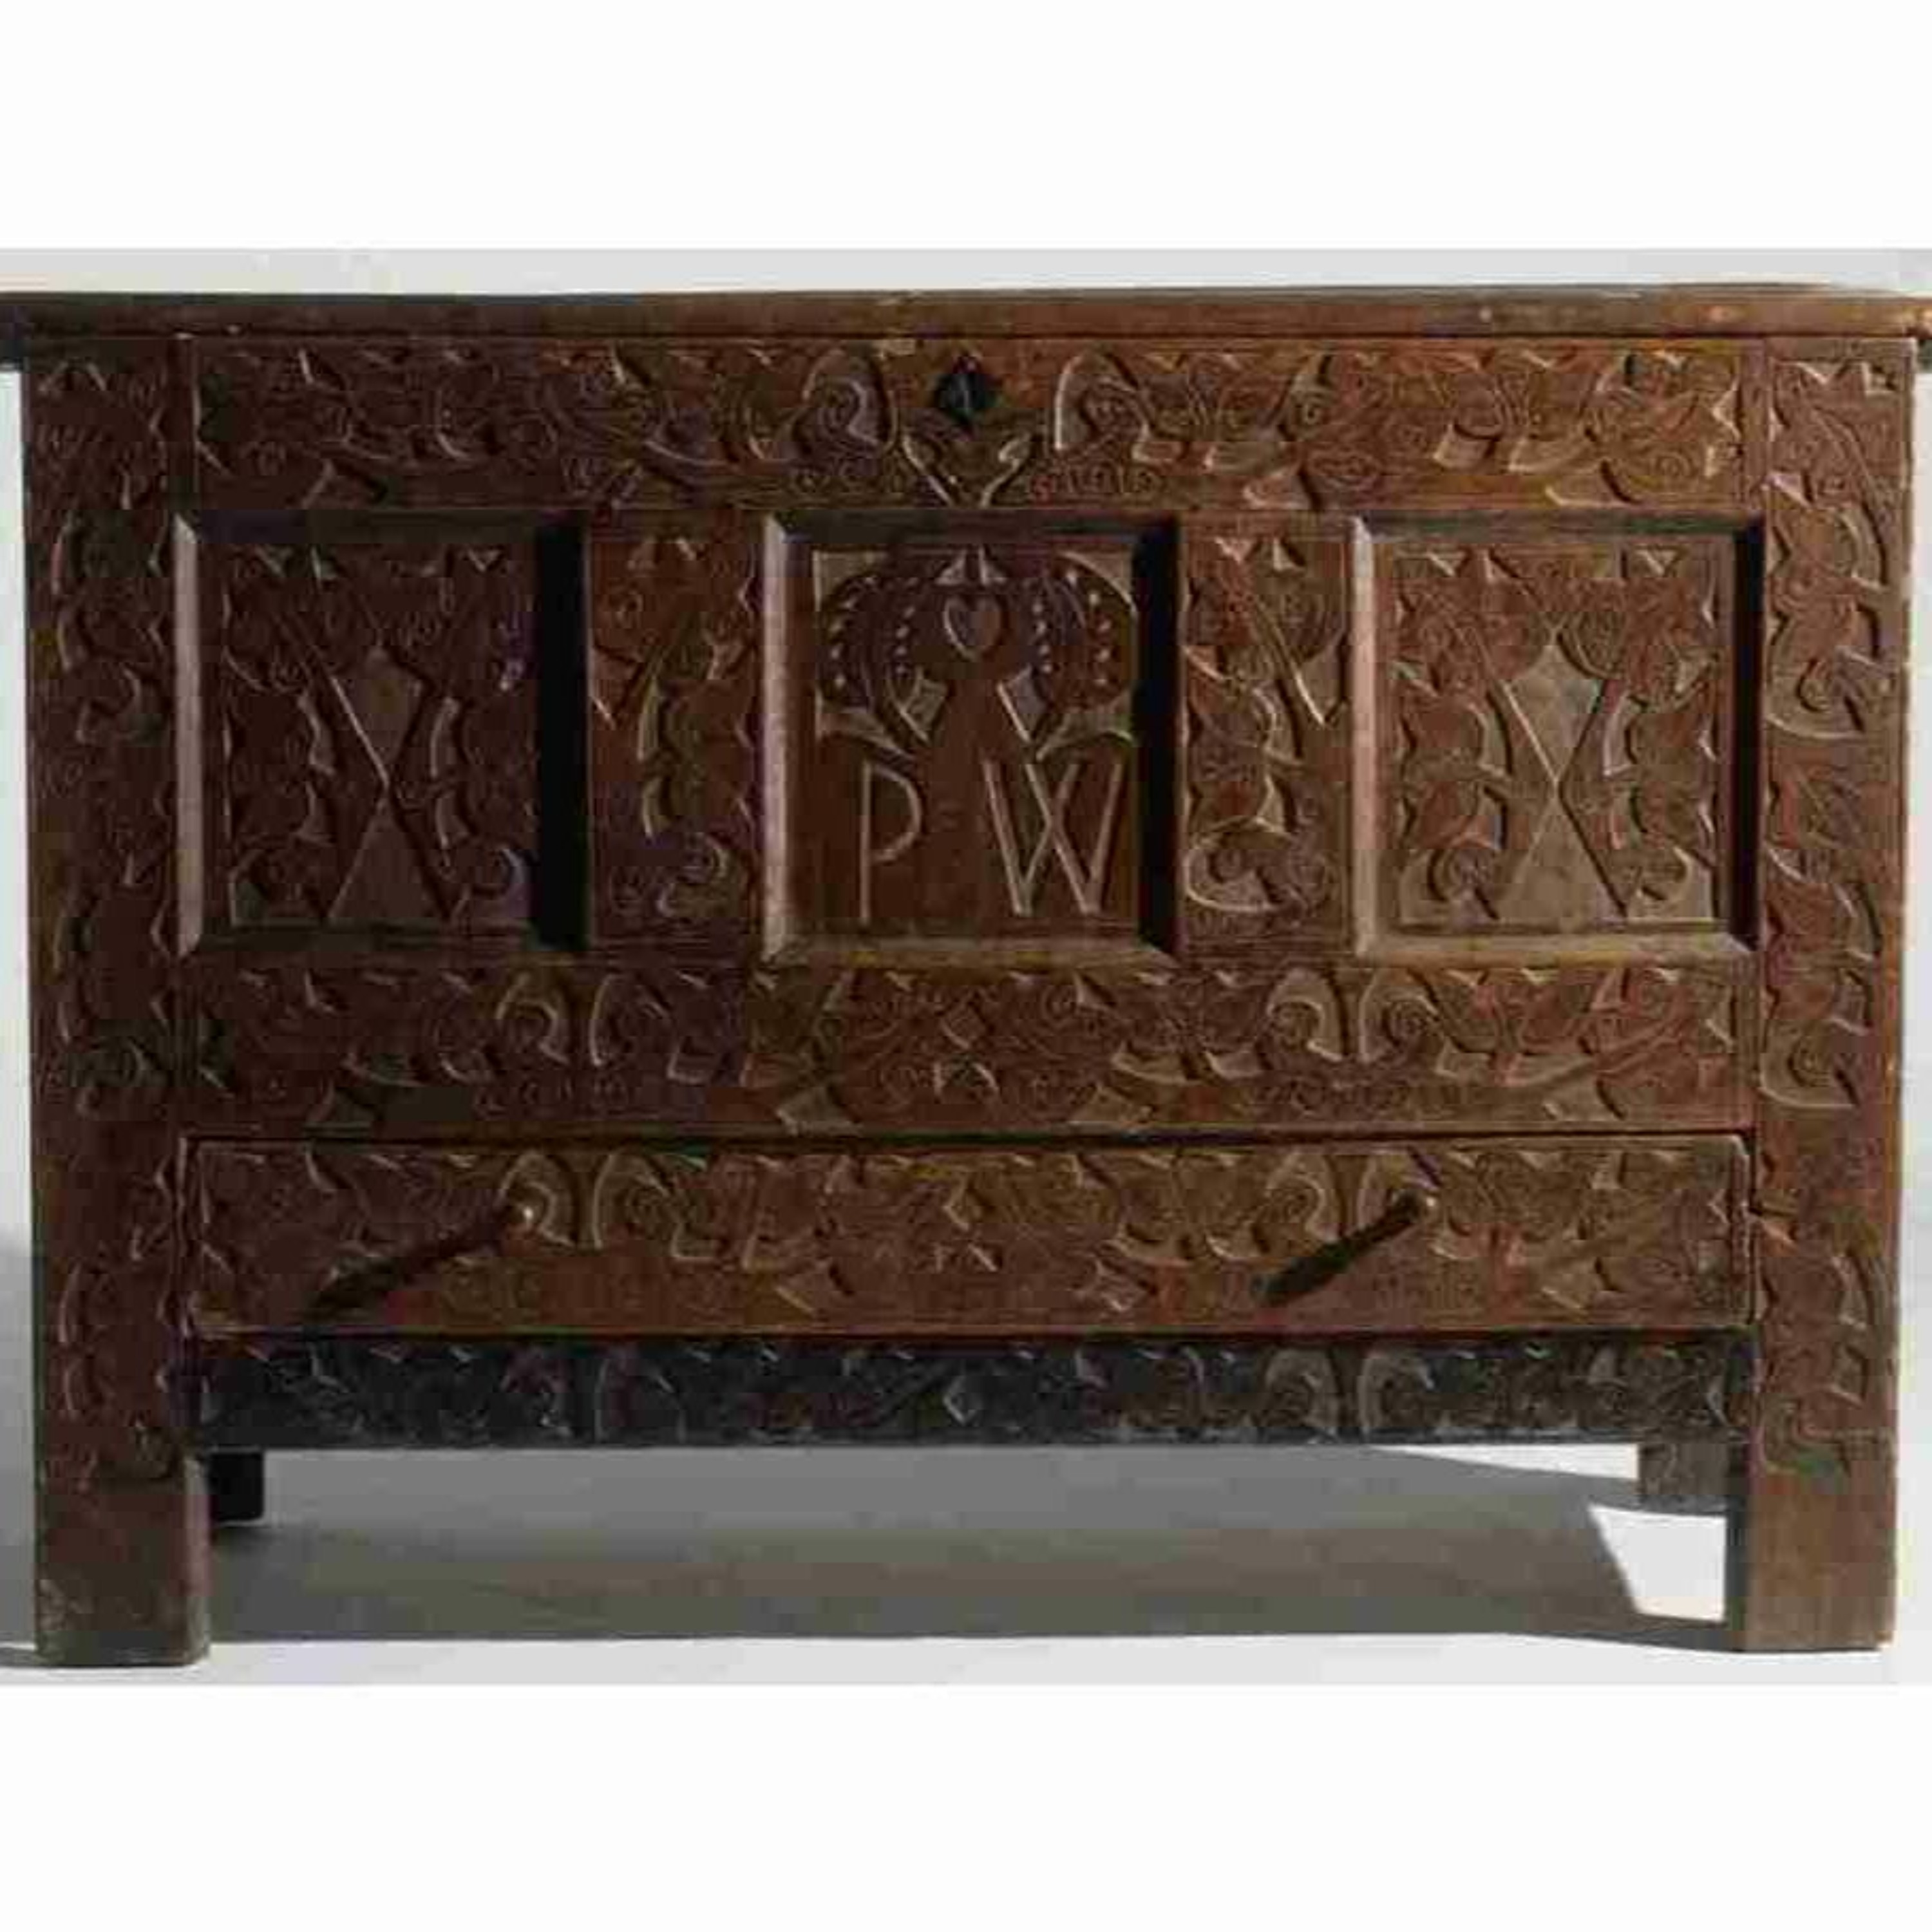 UNLOCKED:  History of the United States in 100 Objects -- 16: The ”PW” Hadley Chest, 1690-1710